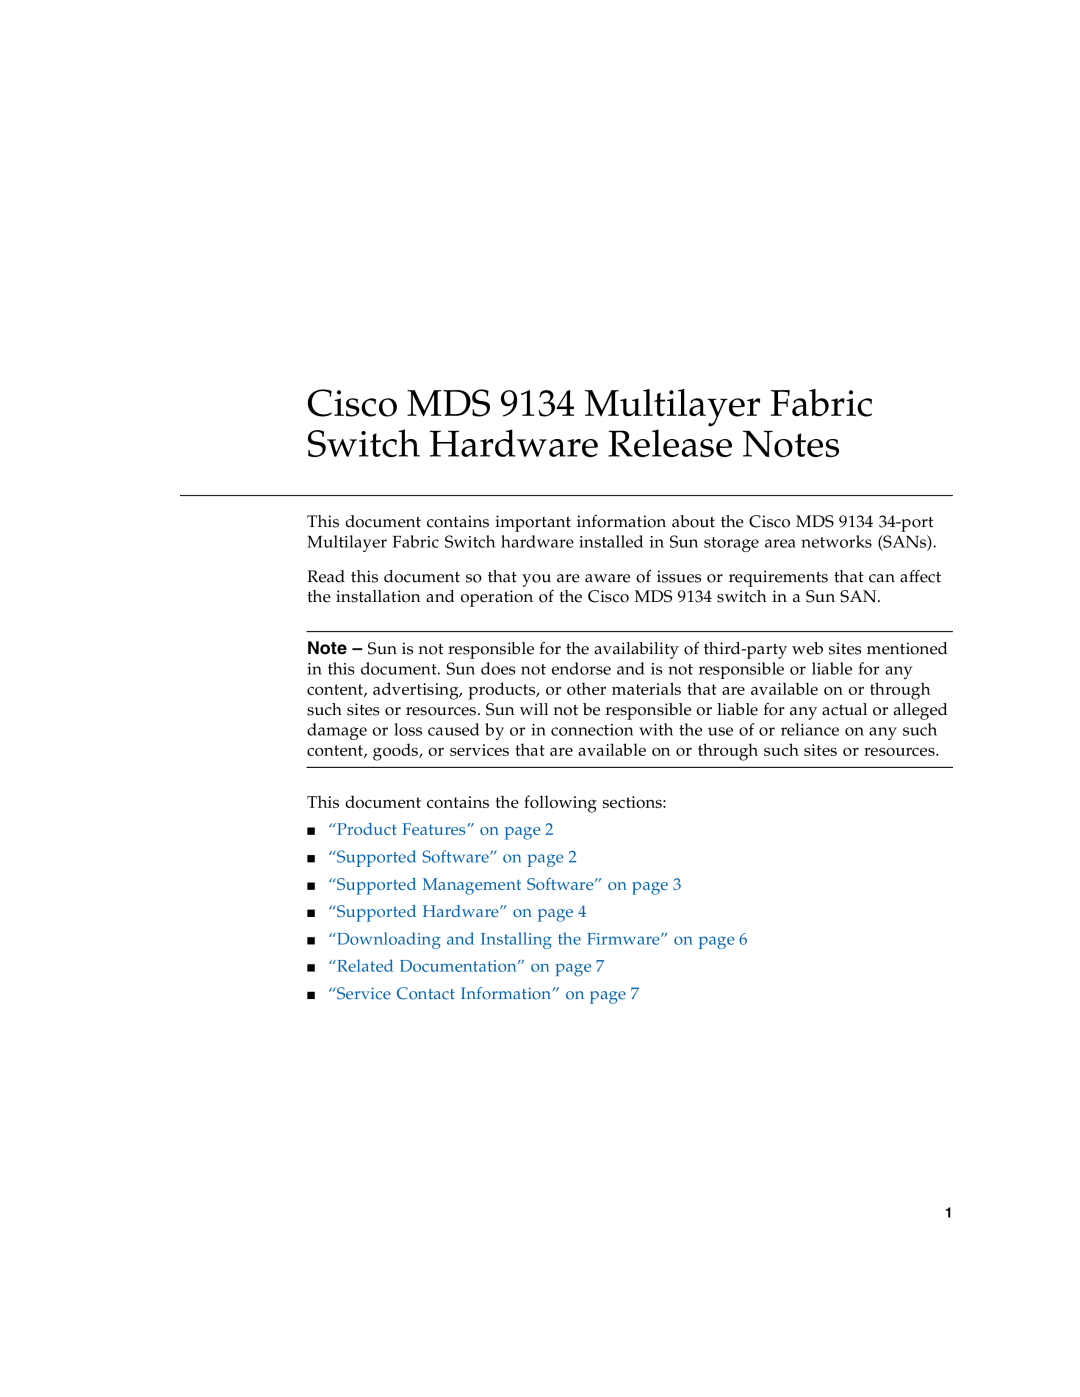 Sun Microsystems manual Cisco MDS 9134 Multilayer Fabric Switch Hardware Release Notes 